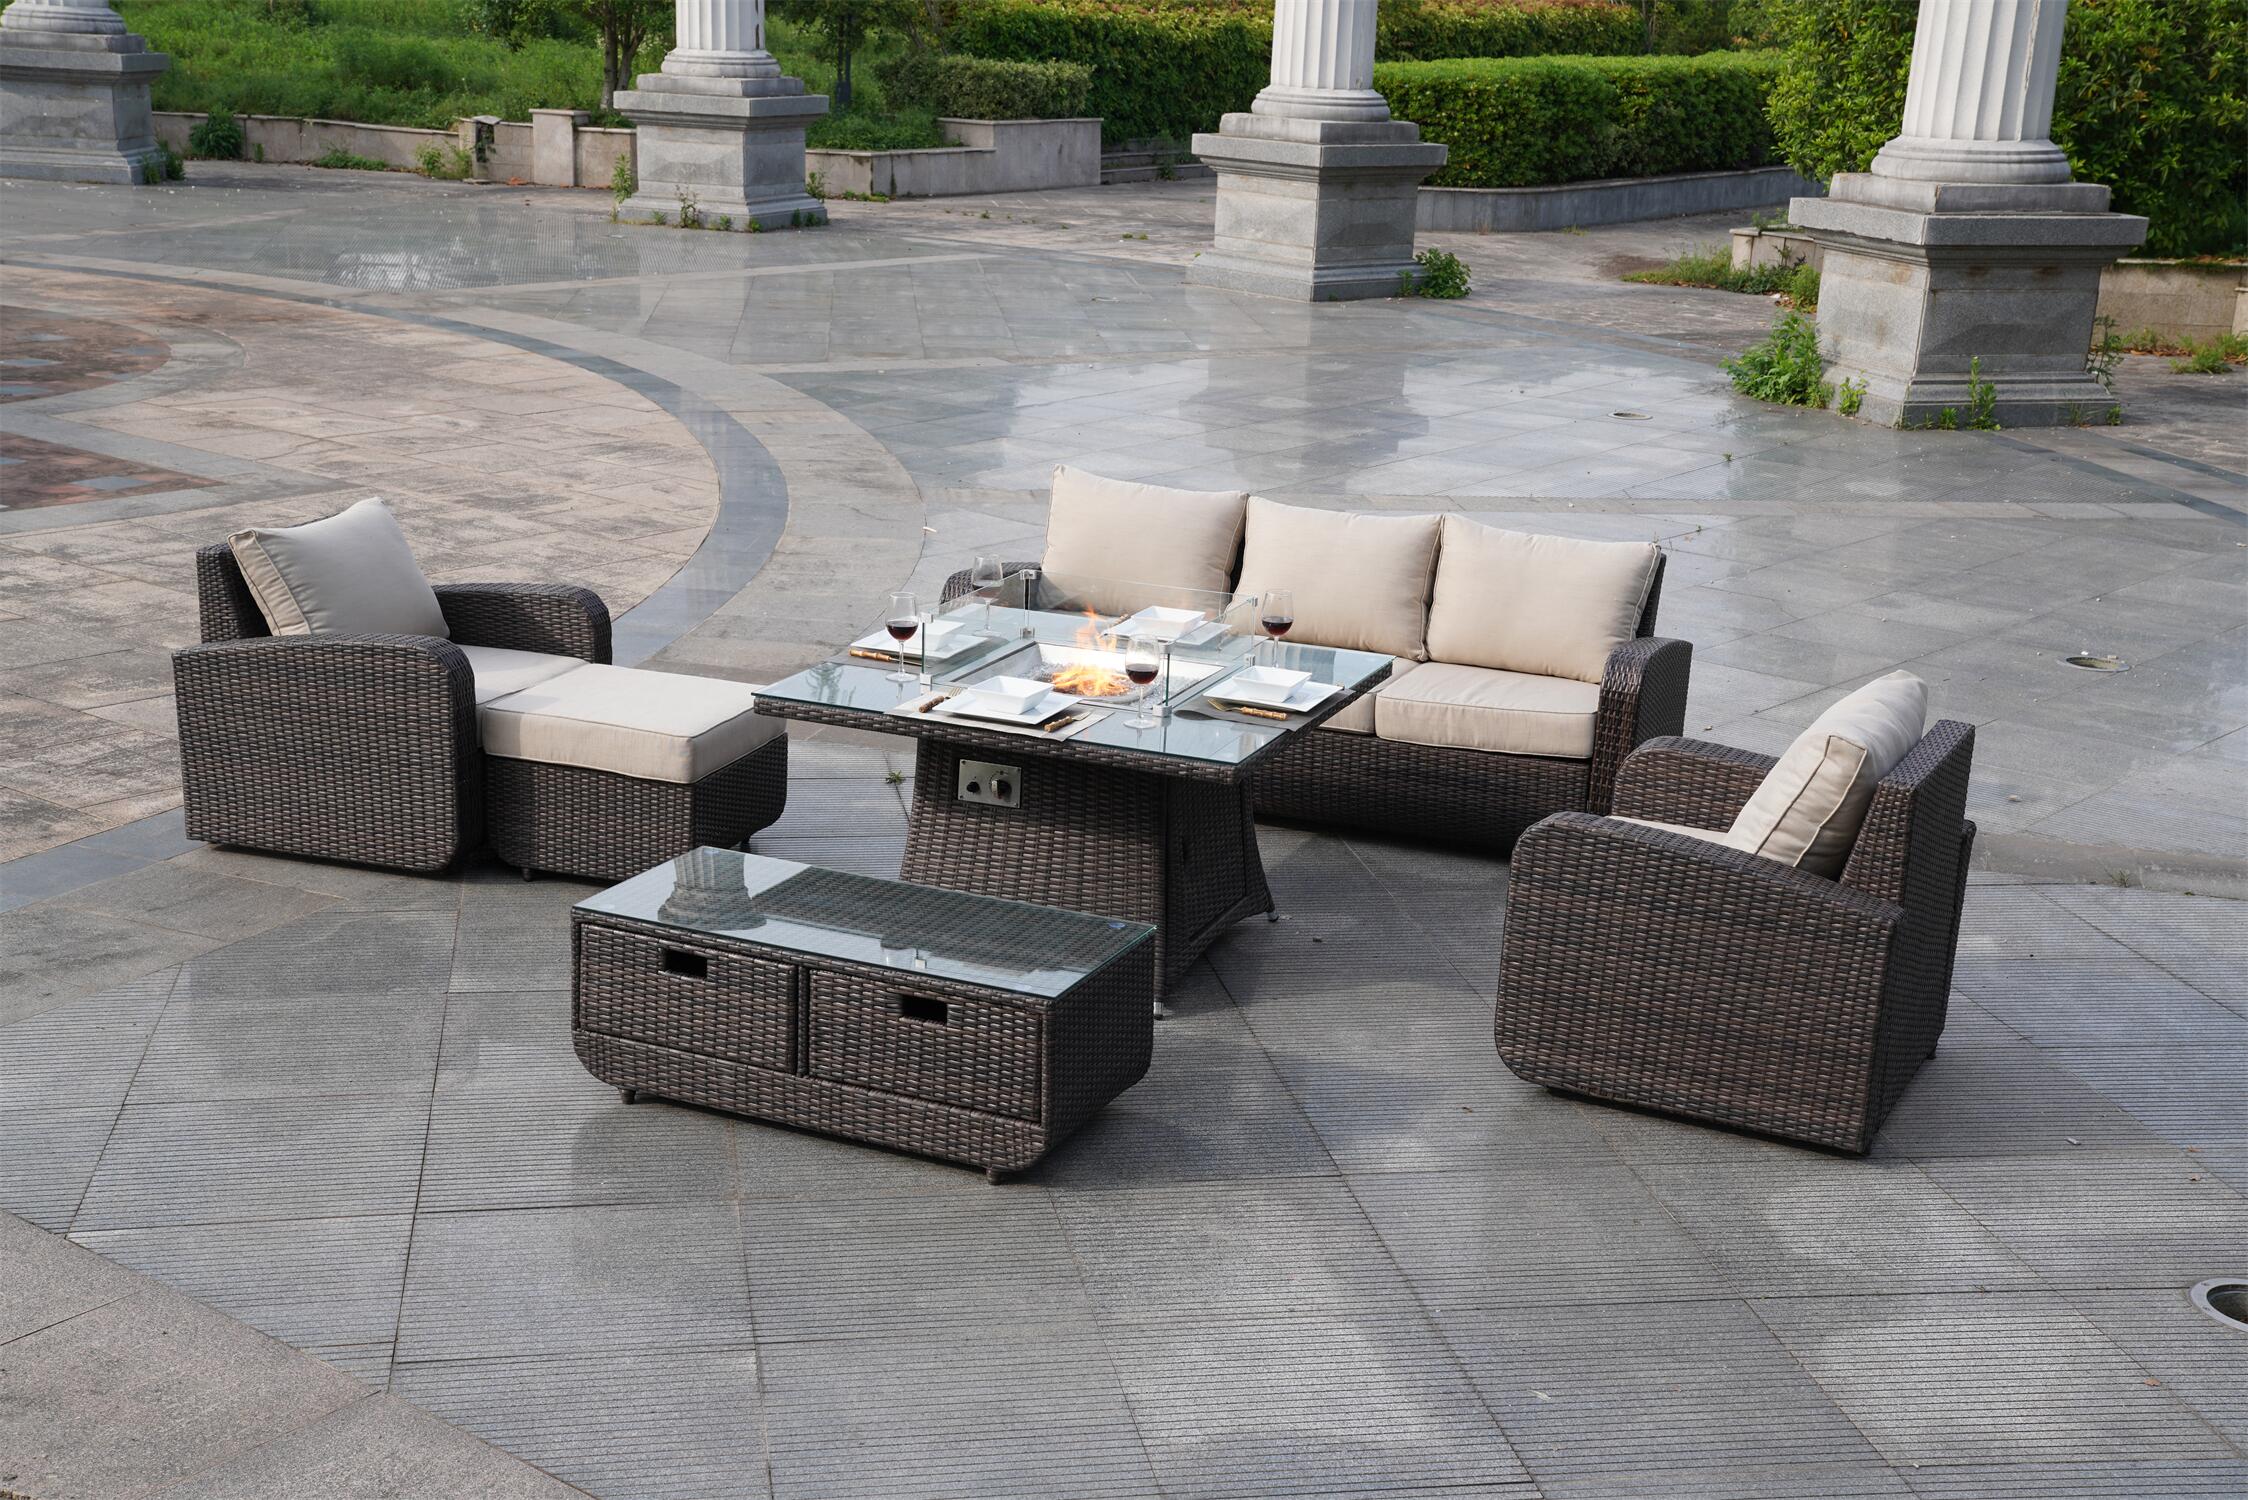 6 P ieces Wicker Patio Square Gas Fire Pit Dining Table with Sofa Set